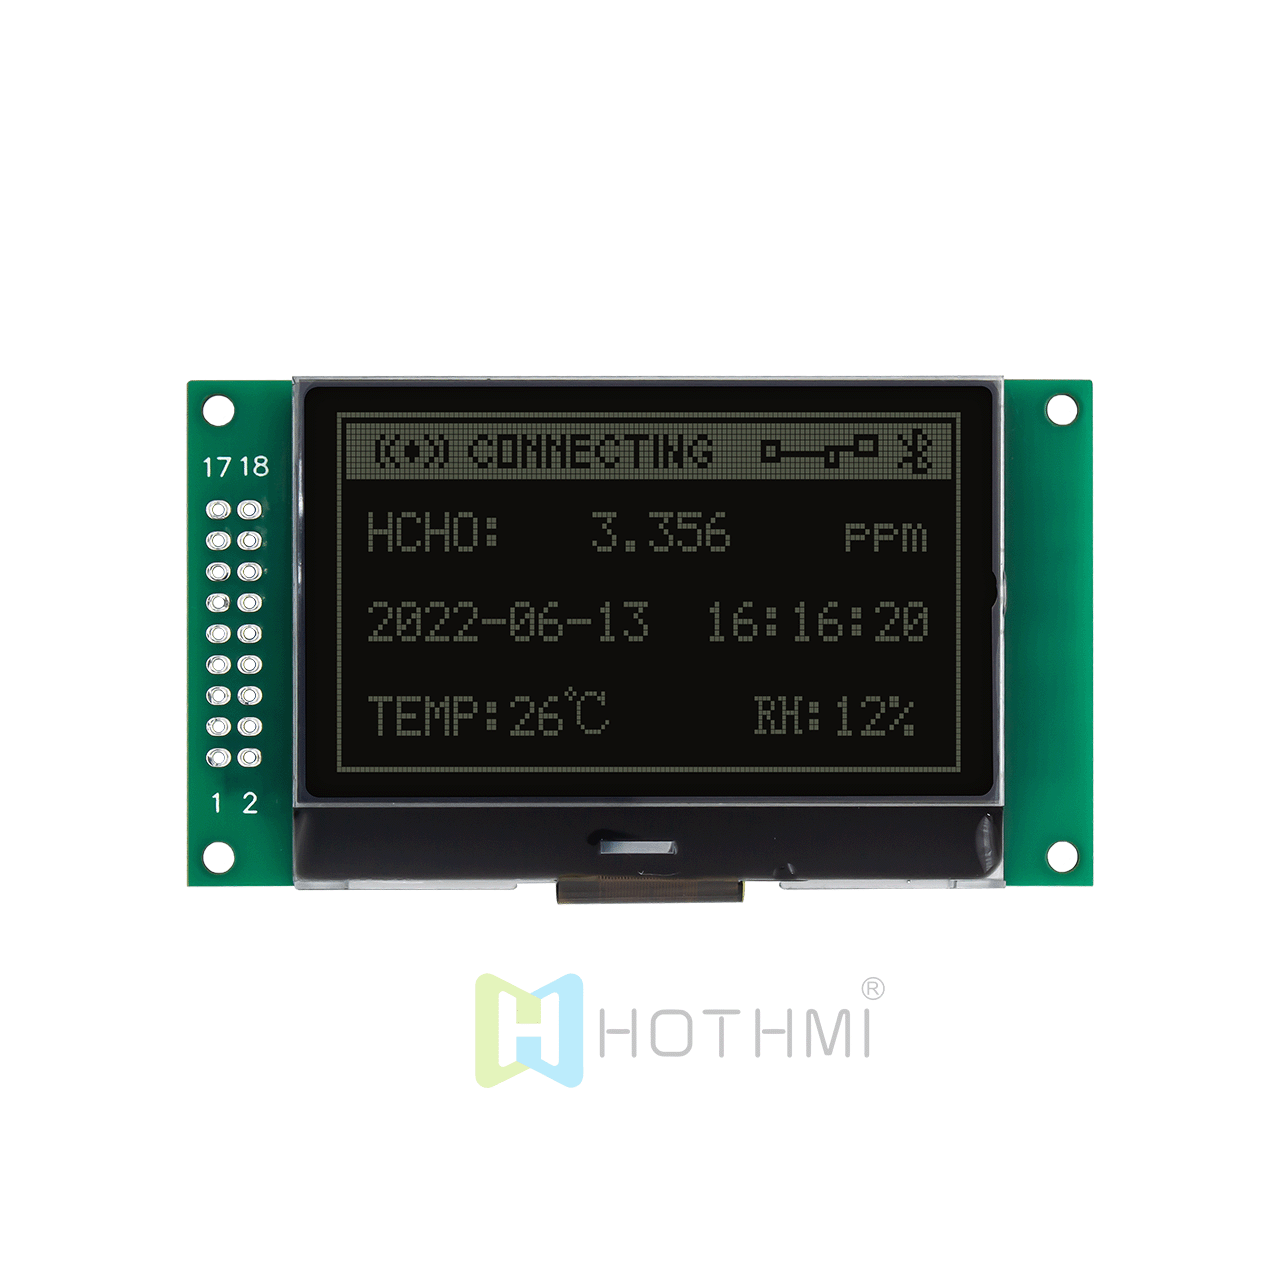 2.4-inch 132x64 LCD graphic LCD screen/132 X 64 graphic dot matrix LCD module/DFSTN negative display/white text on black background